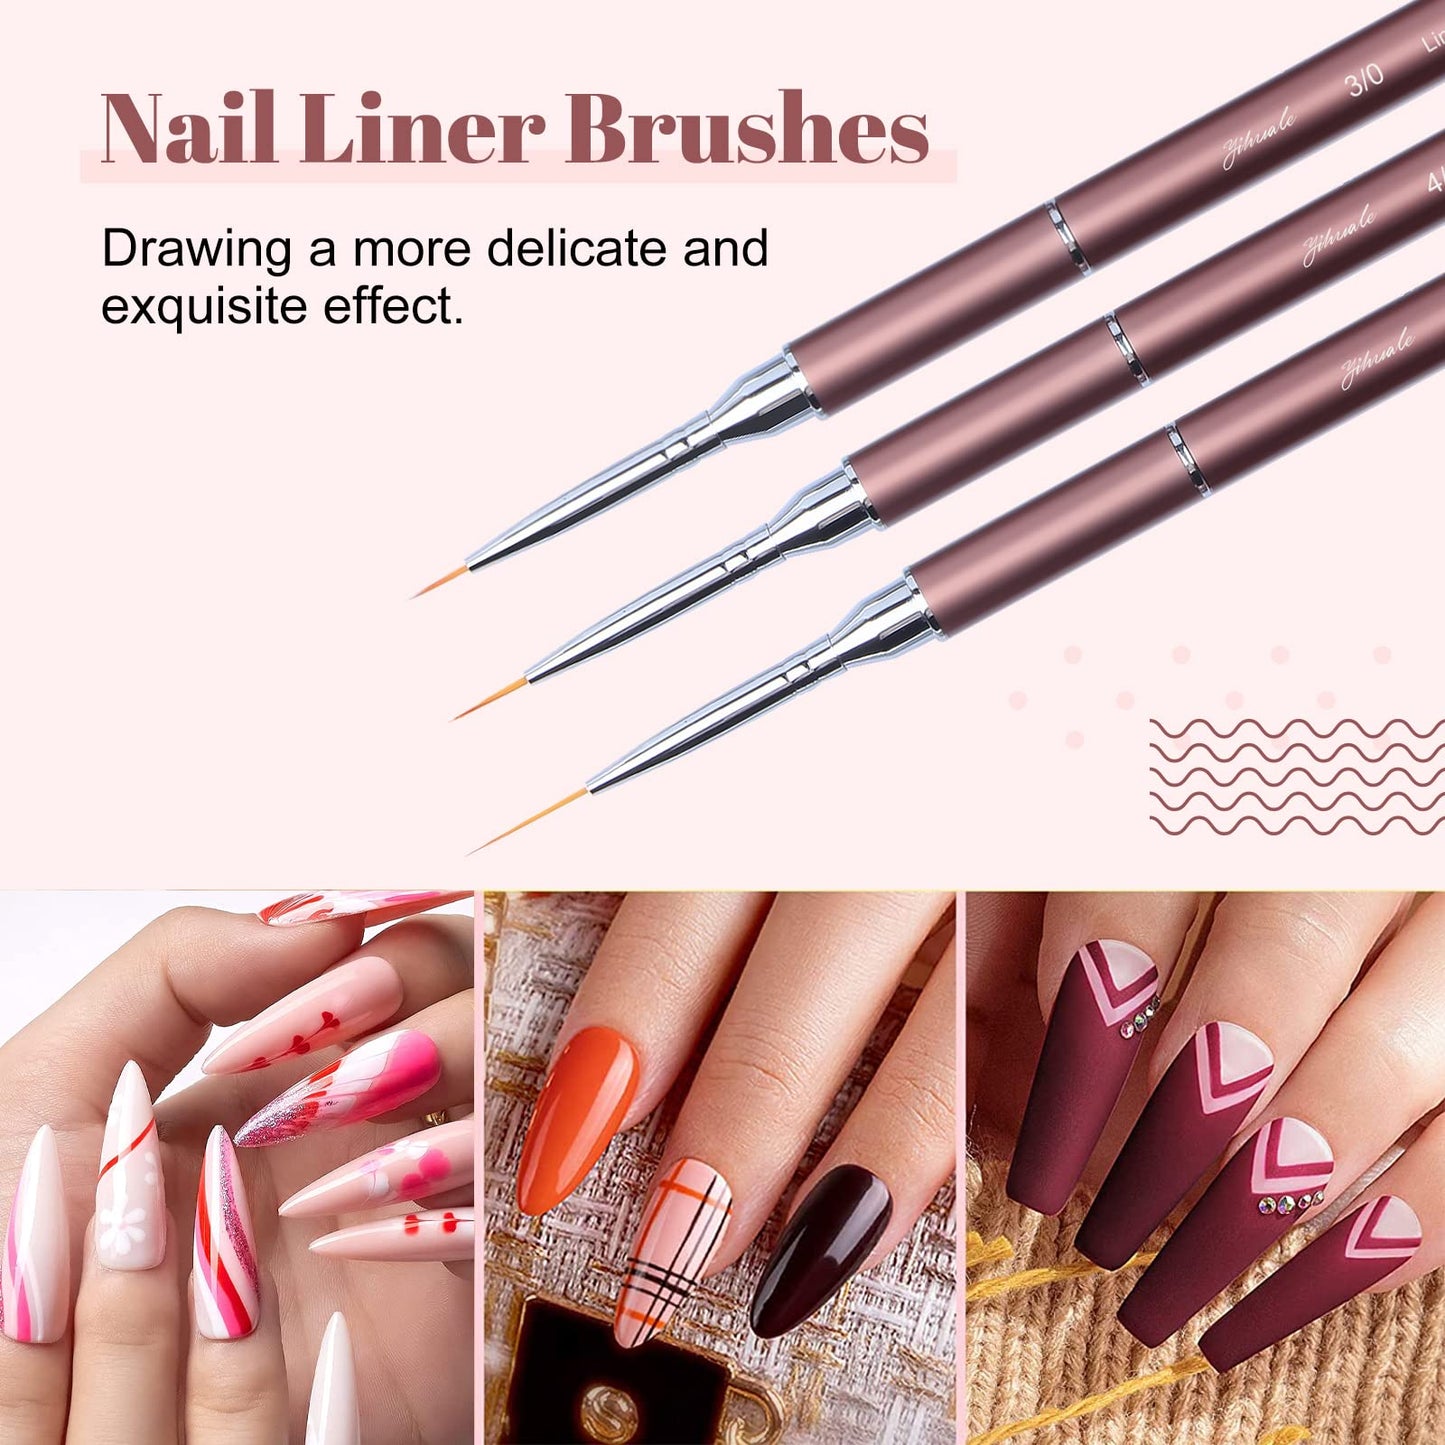 Nail Art Brushes Set, YIHUELE Nail Art Design Painting Tools with Nail Extension Gel Brush, Nail Art Liner Brush for Gel Polish Manicure Salon DIY at Home (Coffee)